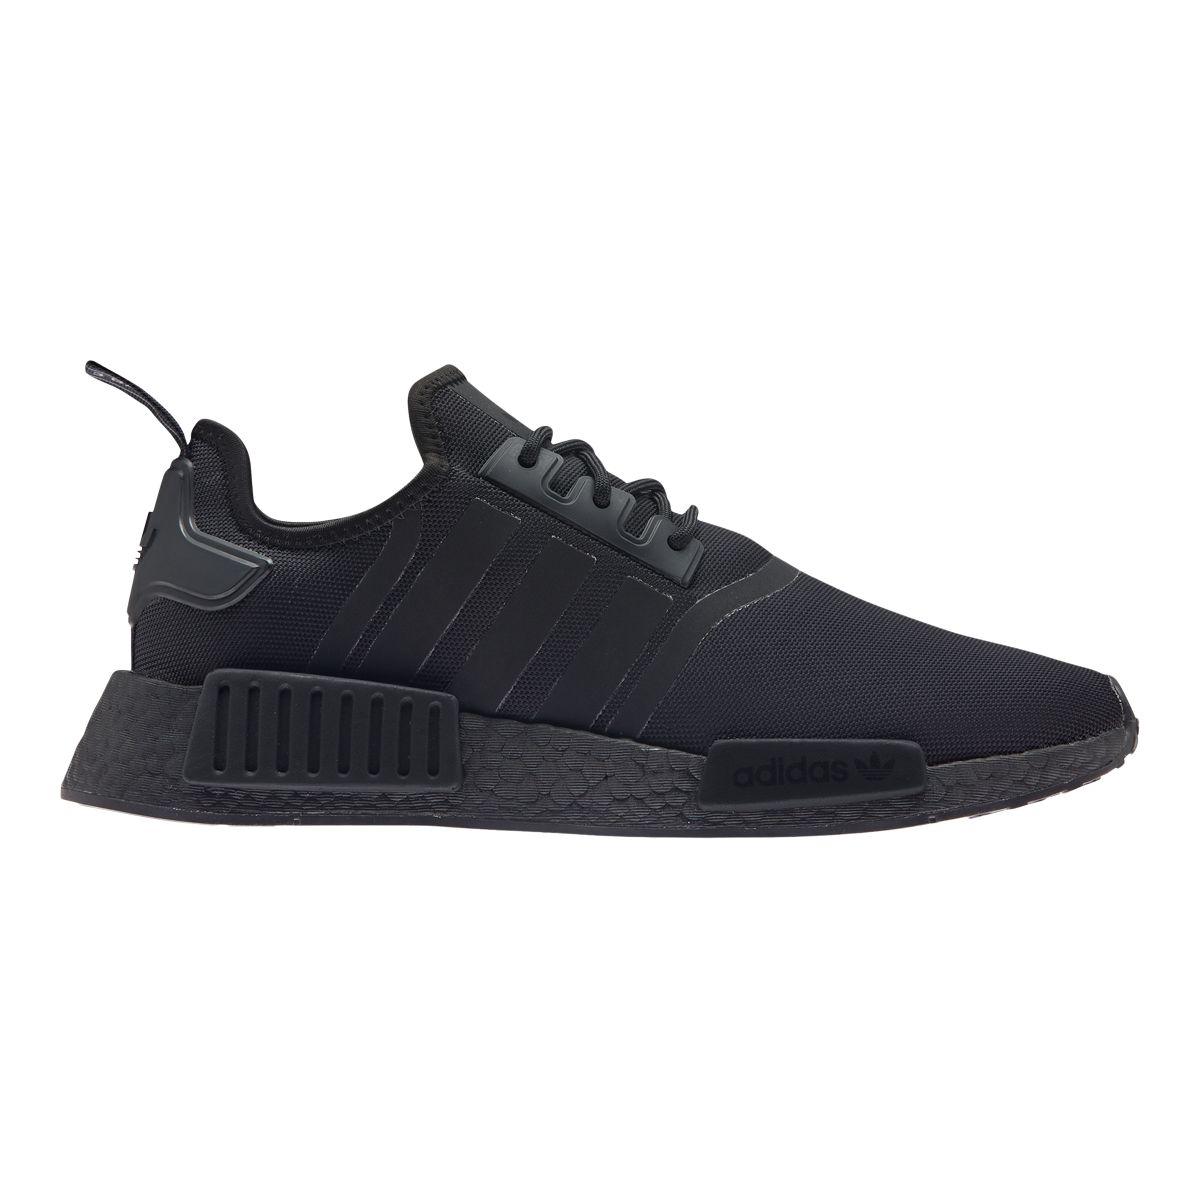 adidas Men's NMD_R1 Boost Shoes, Sneakers, Knit